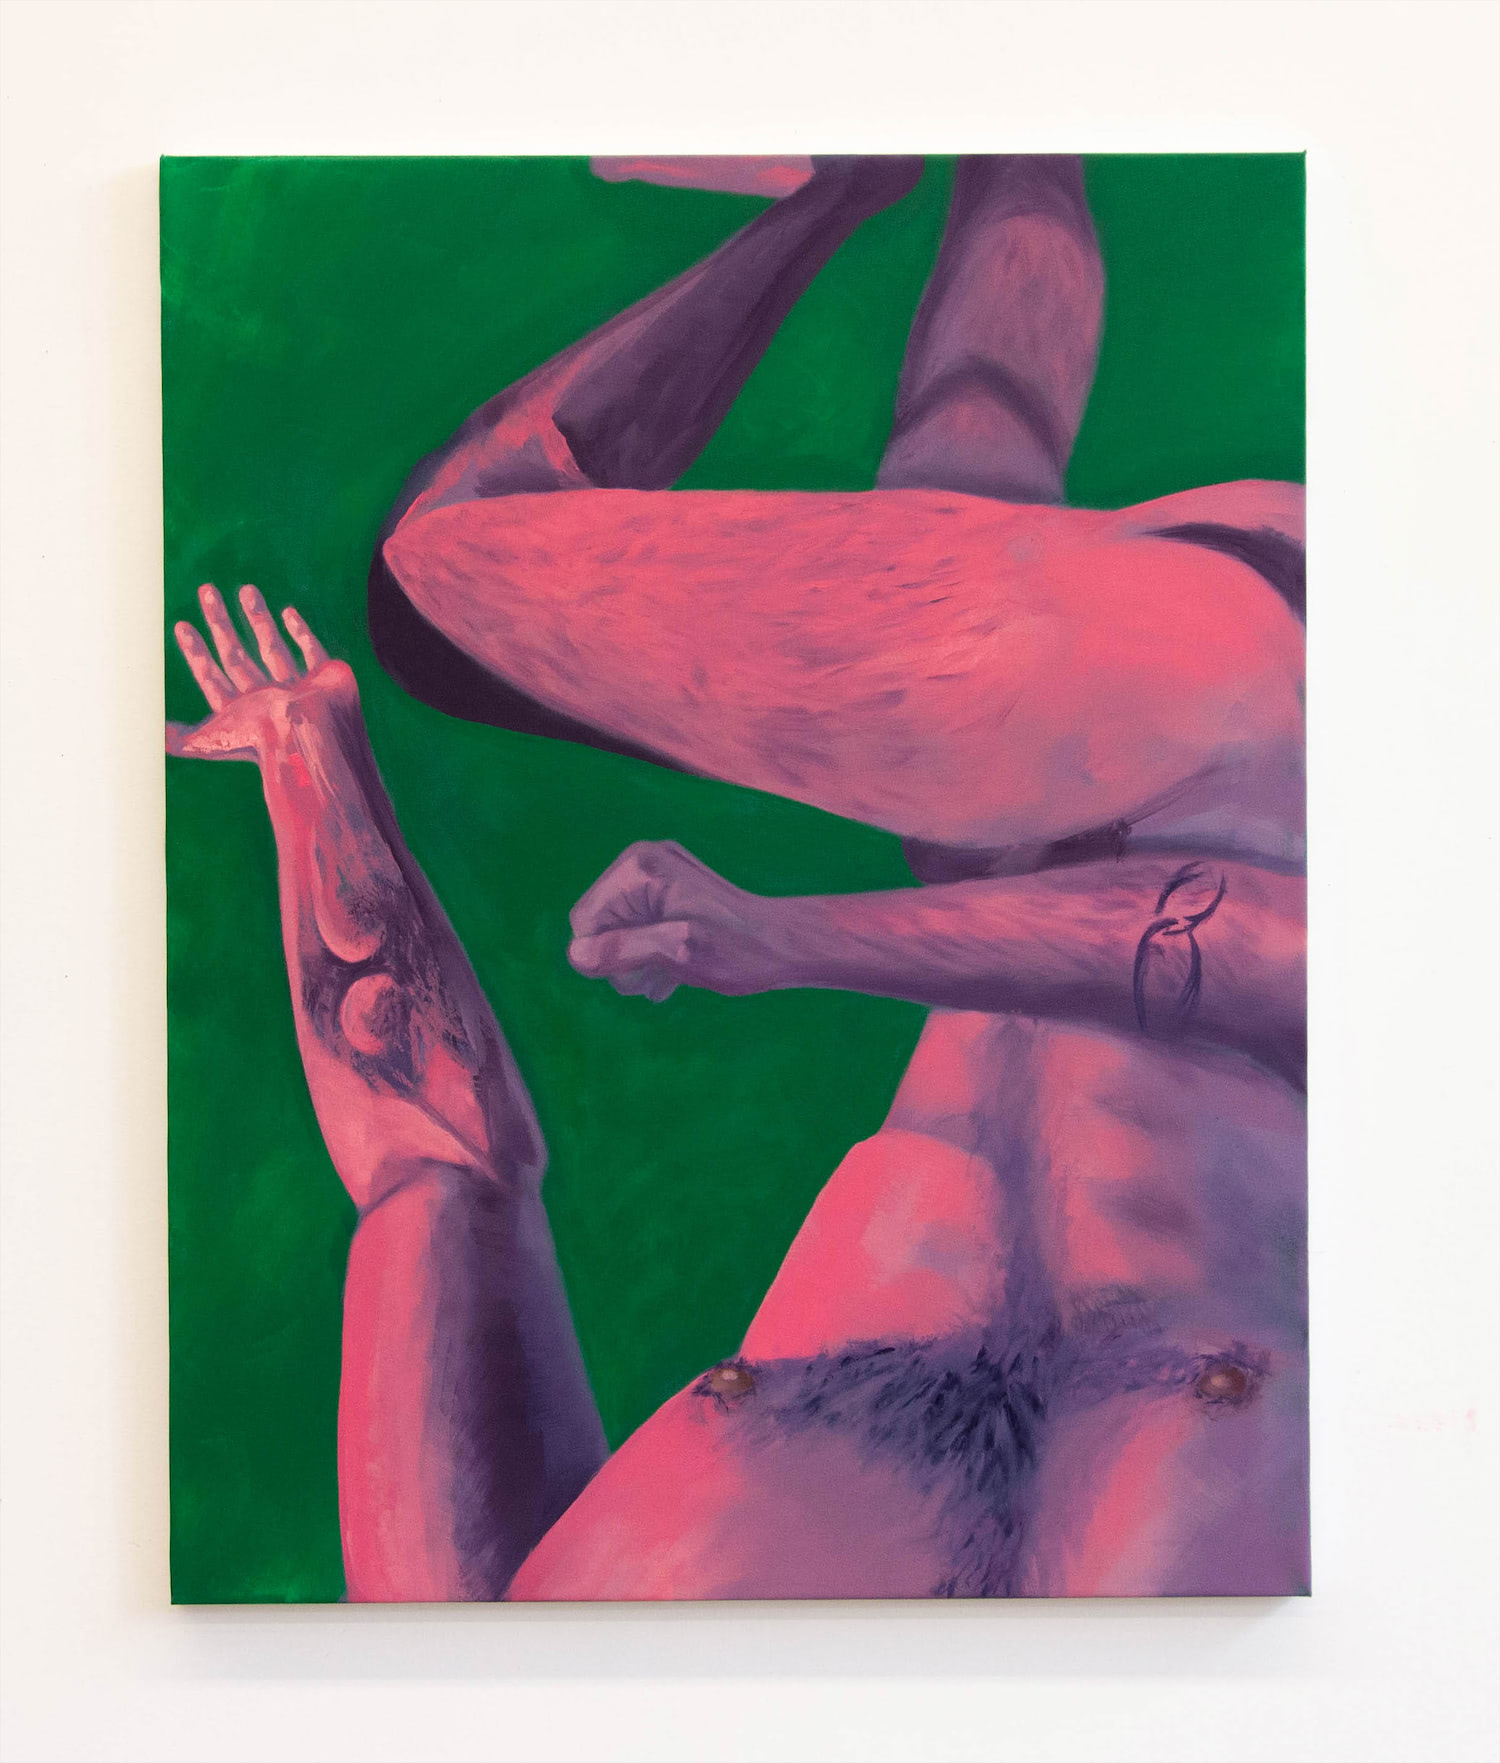 This image displays a body composed of pinks and purples in a vast green space. The oil painting depicts a man's body from his point of view with arms sprawled out. One hand is clenching and the other is open, reaching for something. One leg is crossed over the other which implies a laying position, yet the context of which is absent.